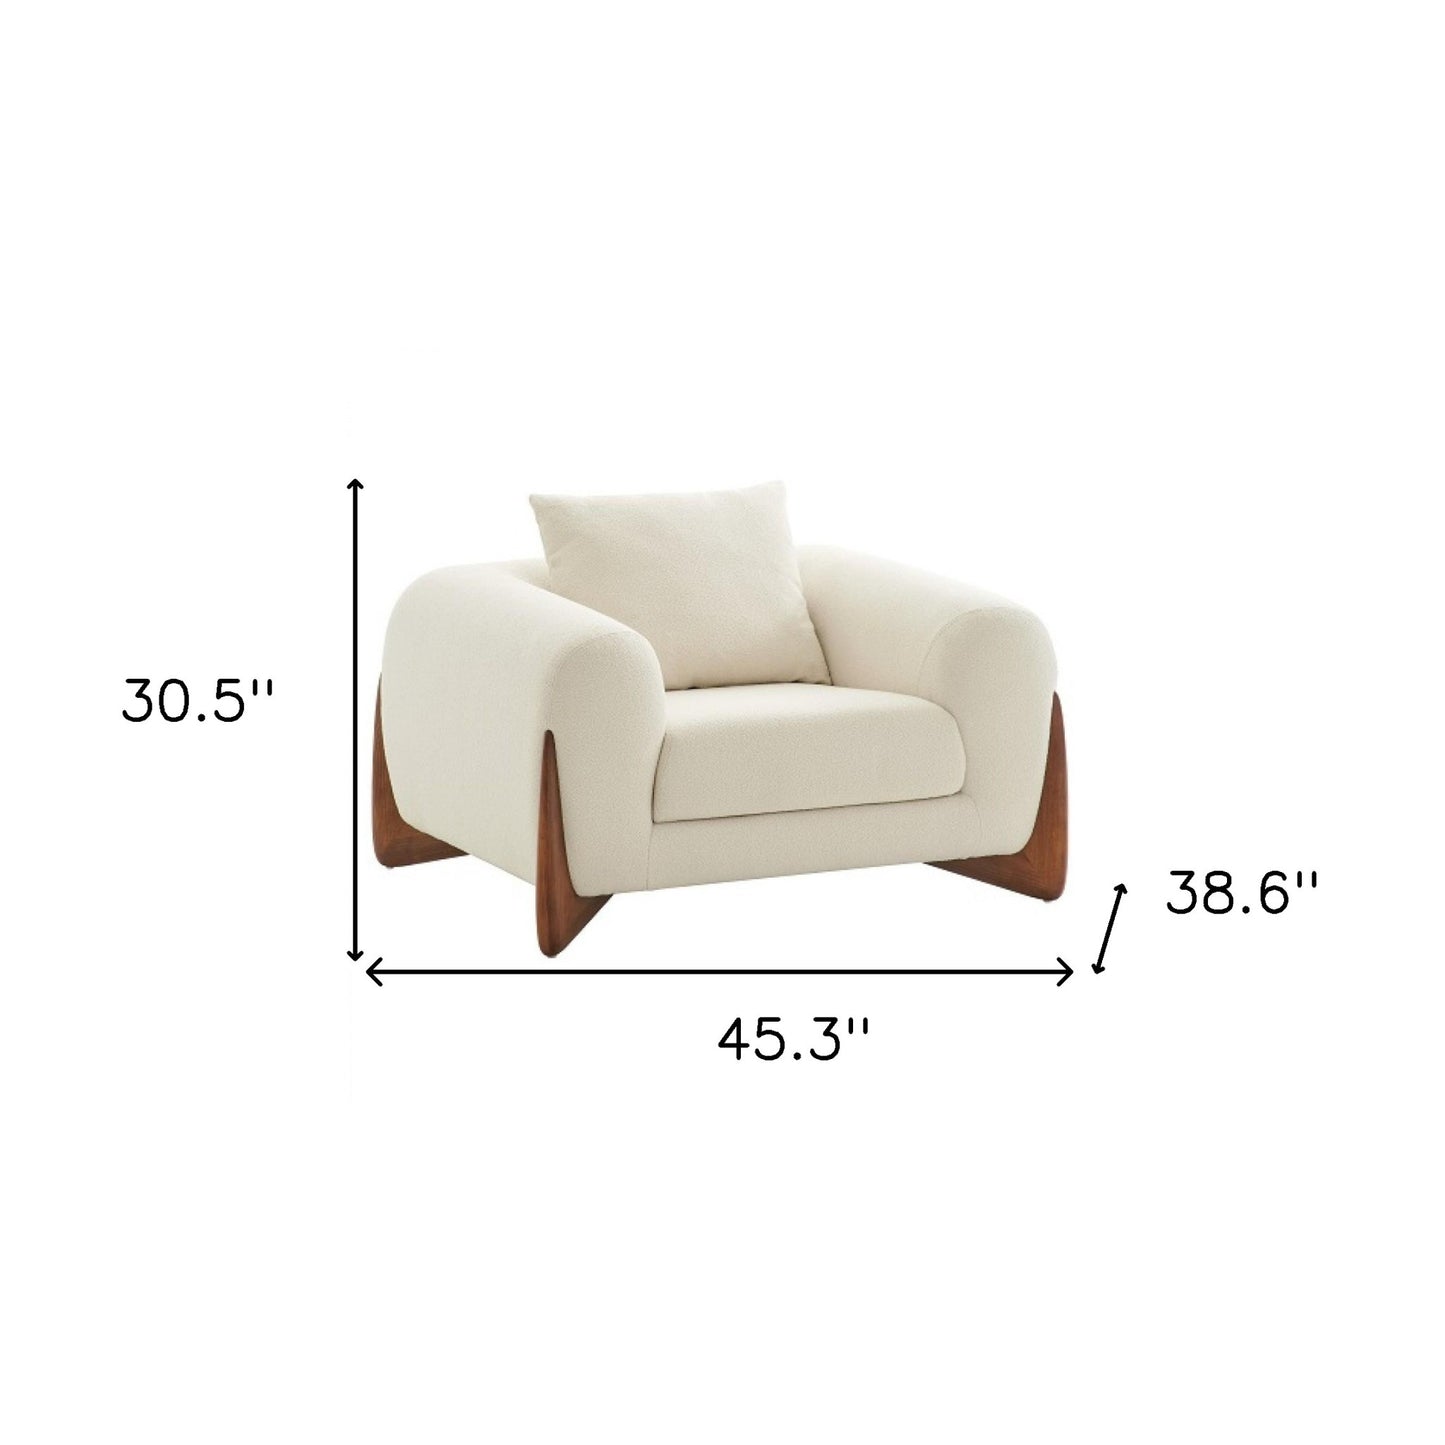 45" Cream And Wood Brown Sherpa Arm Chair